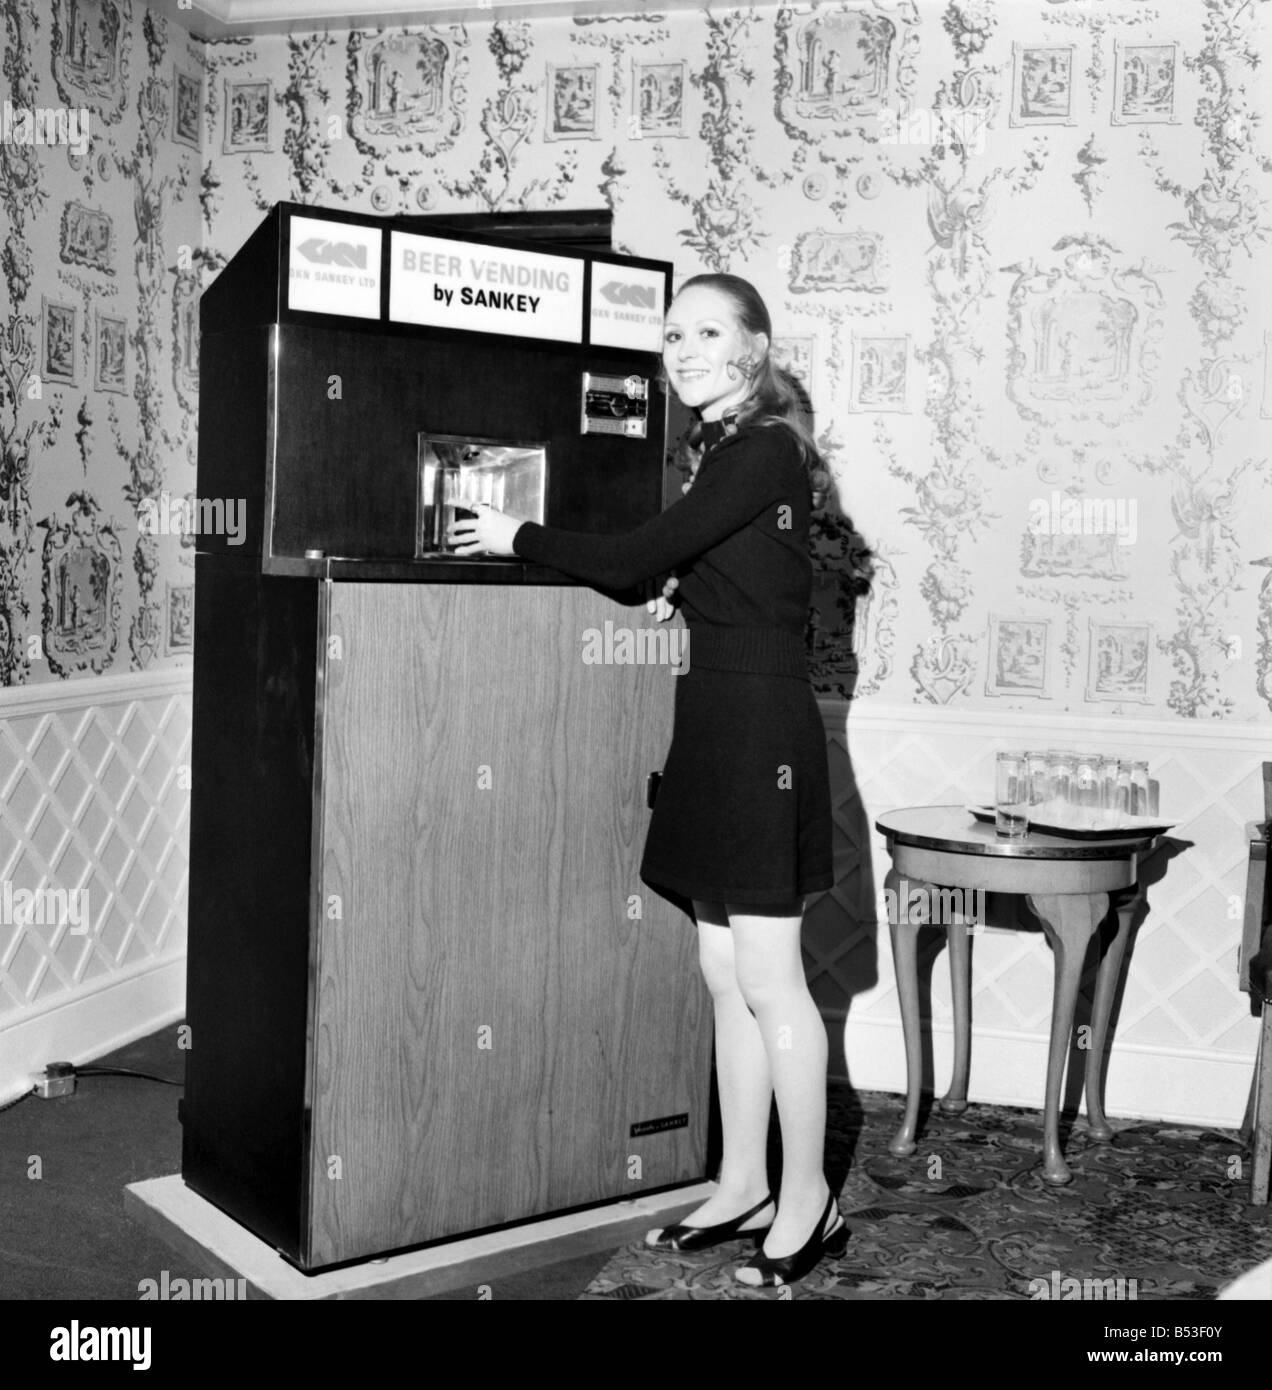 Inventions: Britain's first automatic refrigerated draught beer vending machine was demonstrated by the Brewery Division of GKN Sankey Ltd., of Bilston Staffs, at Quaglino's Bury Street, London. Woman with the front of the autobarmaid open showing the interior. December 1969 Z11595 Stock Photo